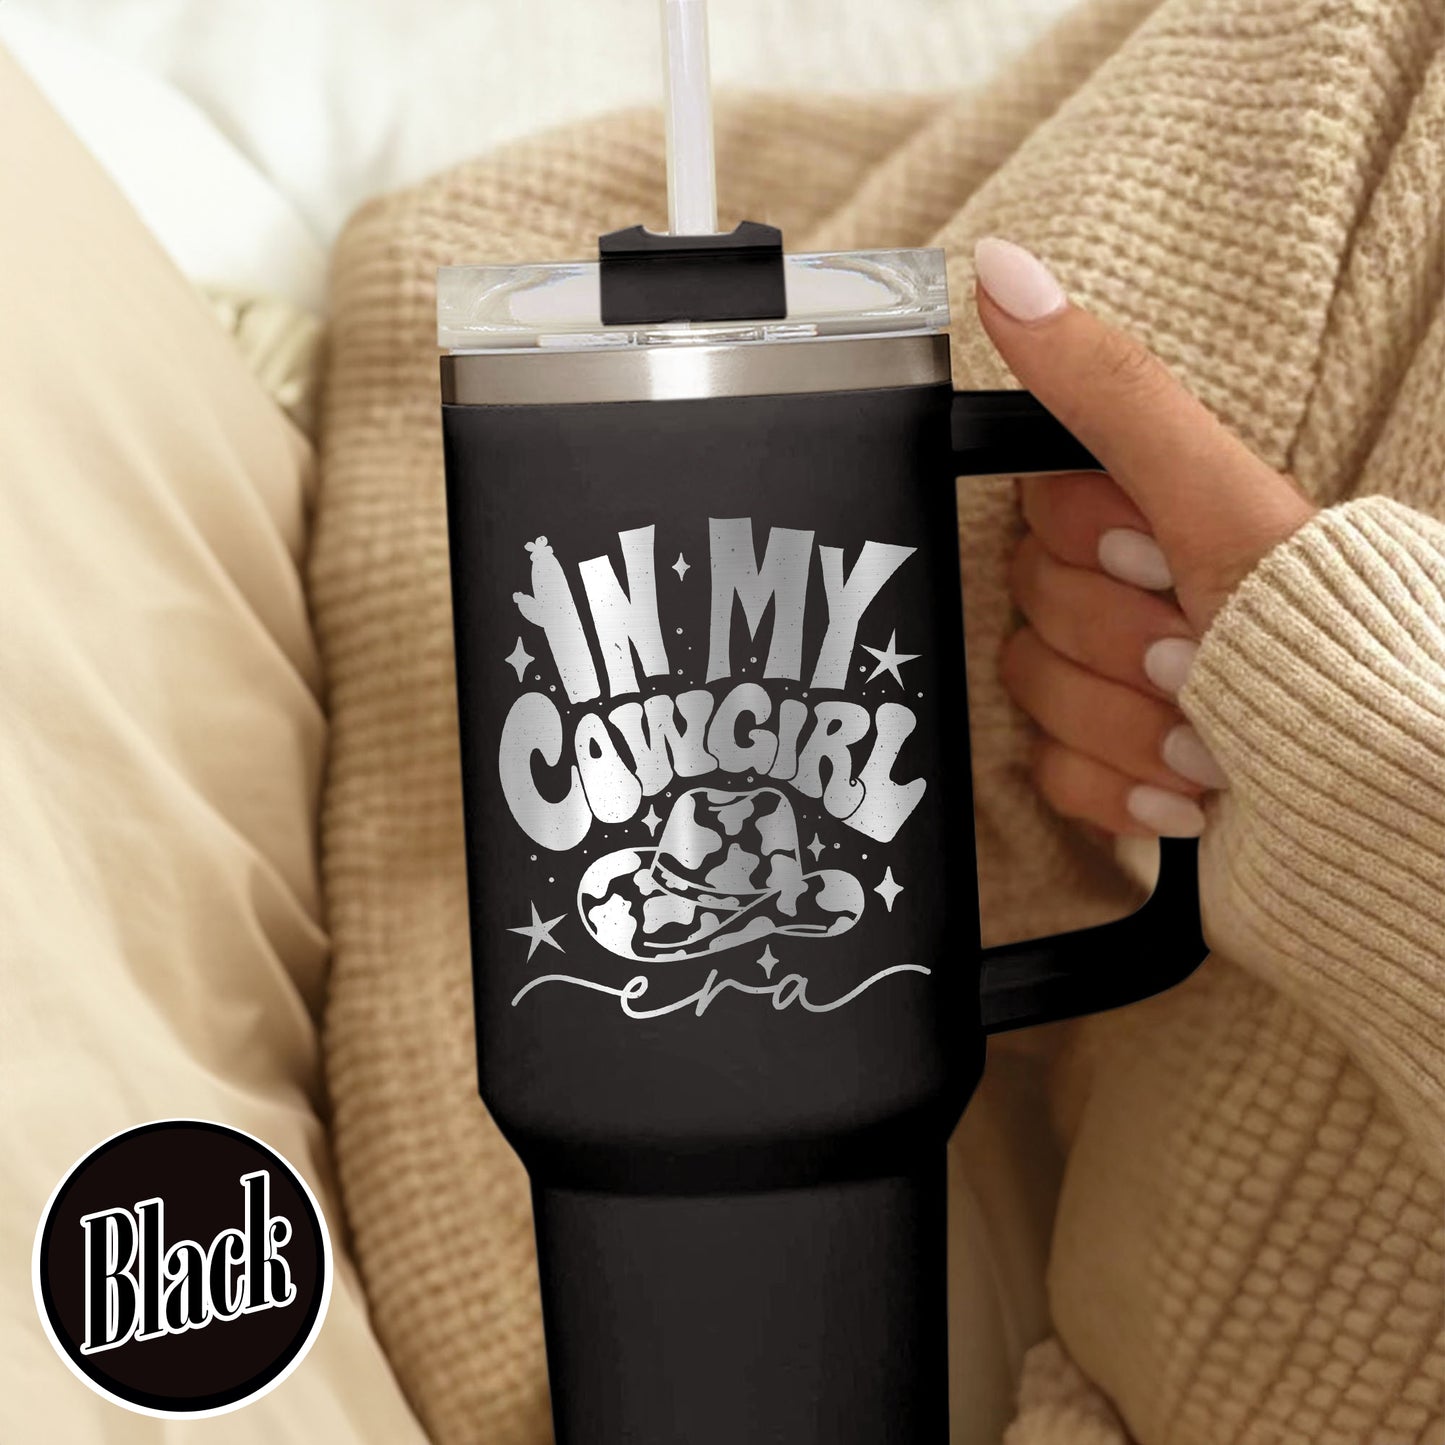 Cowgirl Tumbler Cup, In My Cowgirl Era, Western Cowgirl Tumbler, Cowgirl Themed Tumblers, 40oz Tumbler Engraved, 40oz Tumbler With Handle,